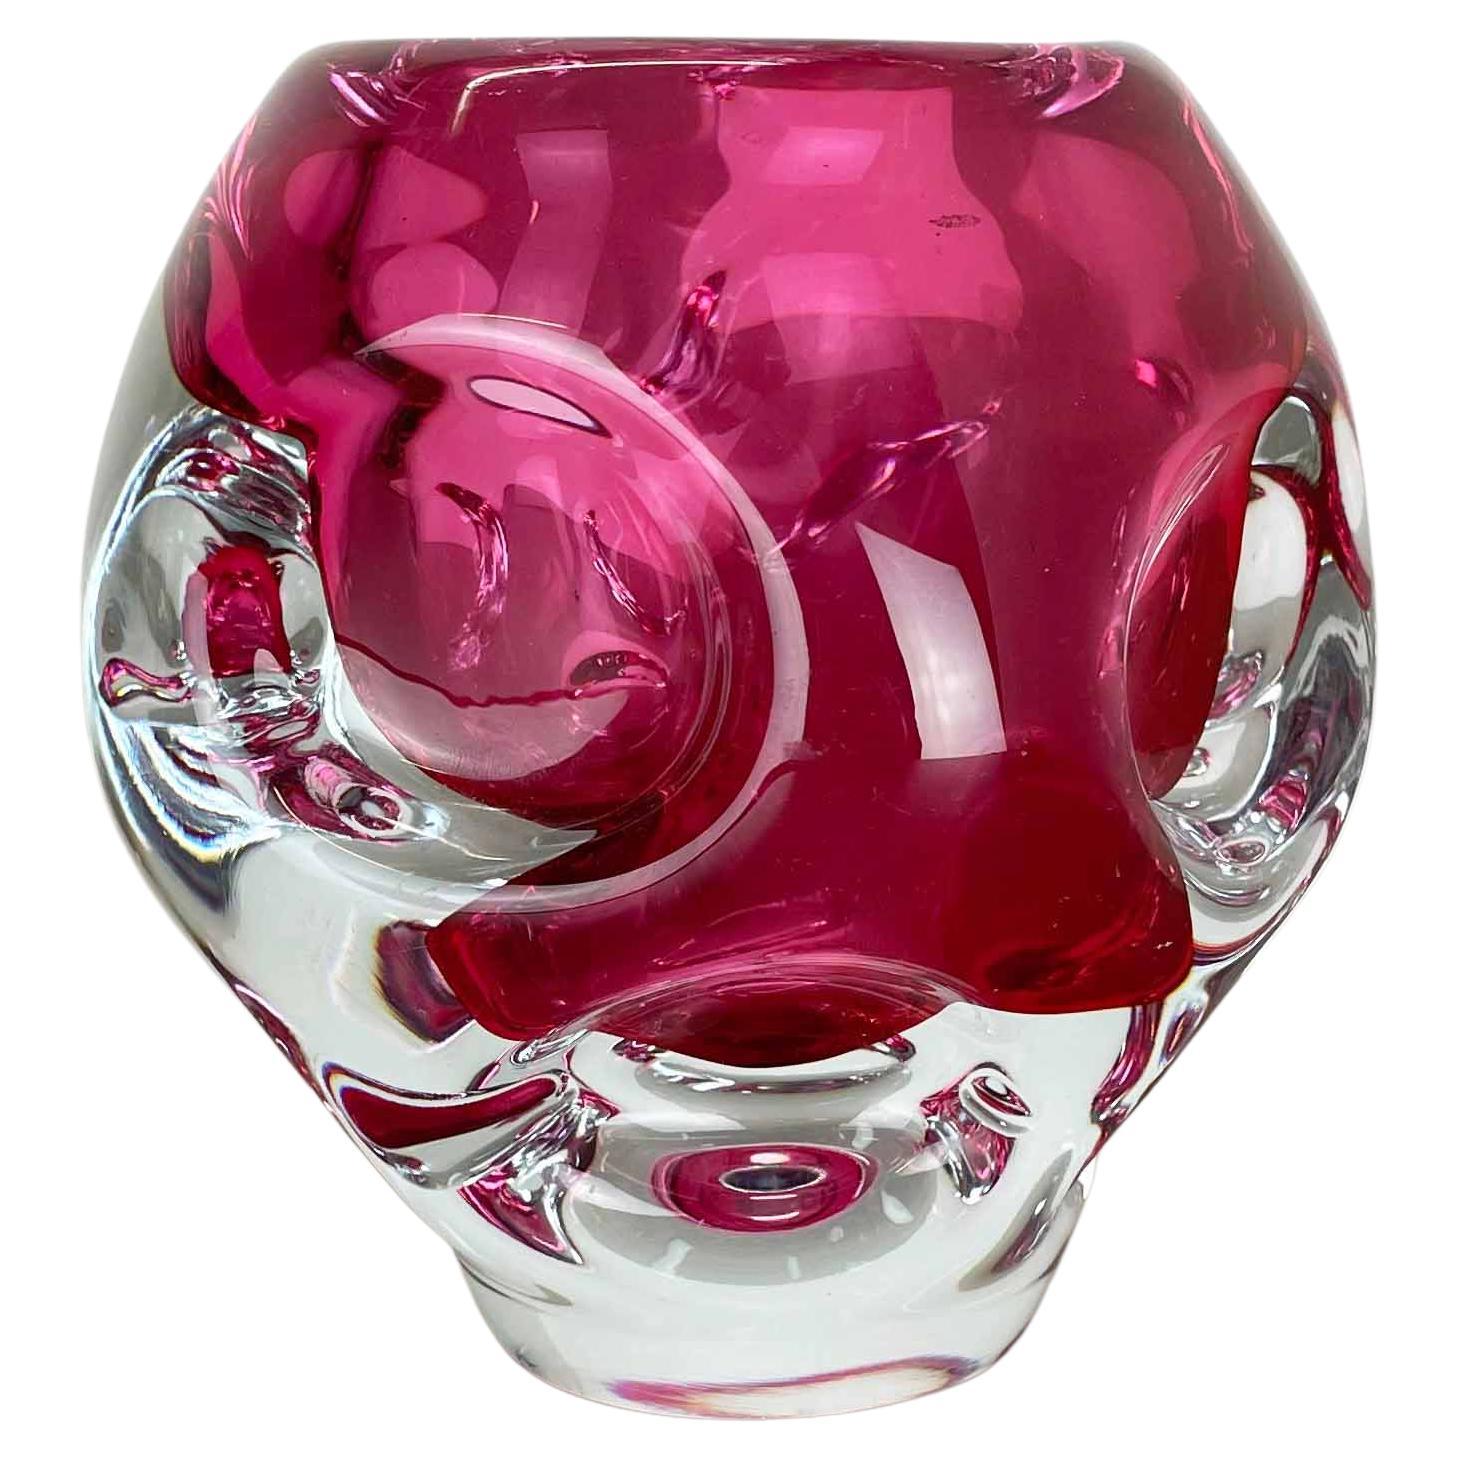 Large 2, 3 Kg Murano Glass "Pink" Floral Bowl Element Vase Murano, Italy, 1970s